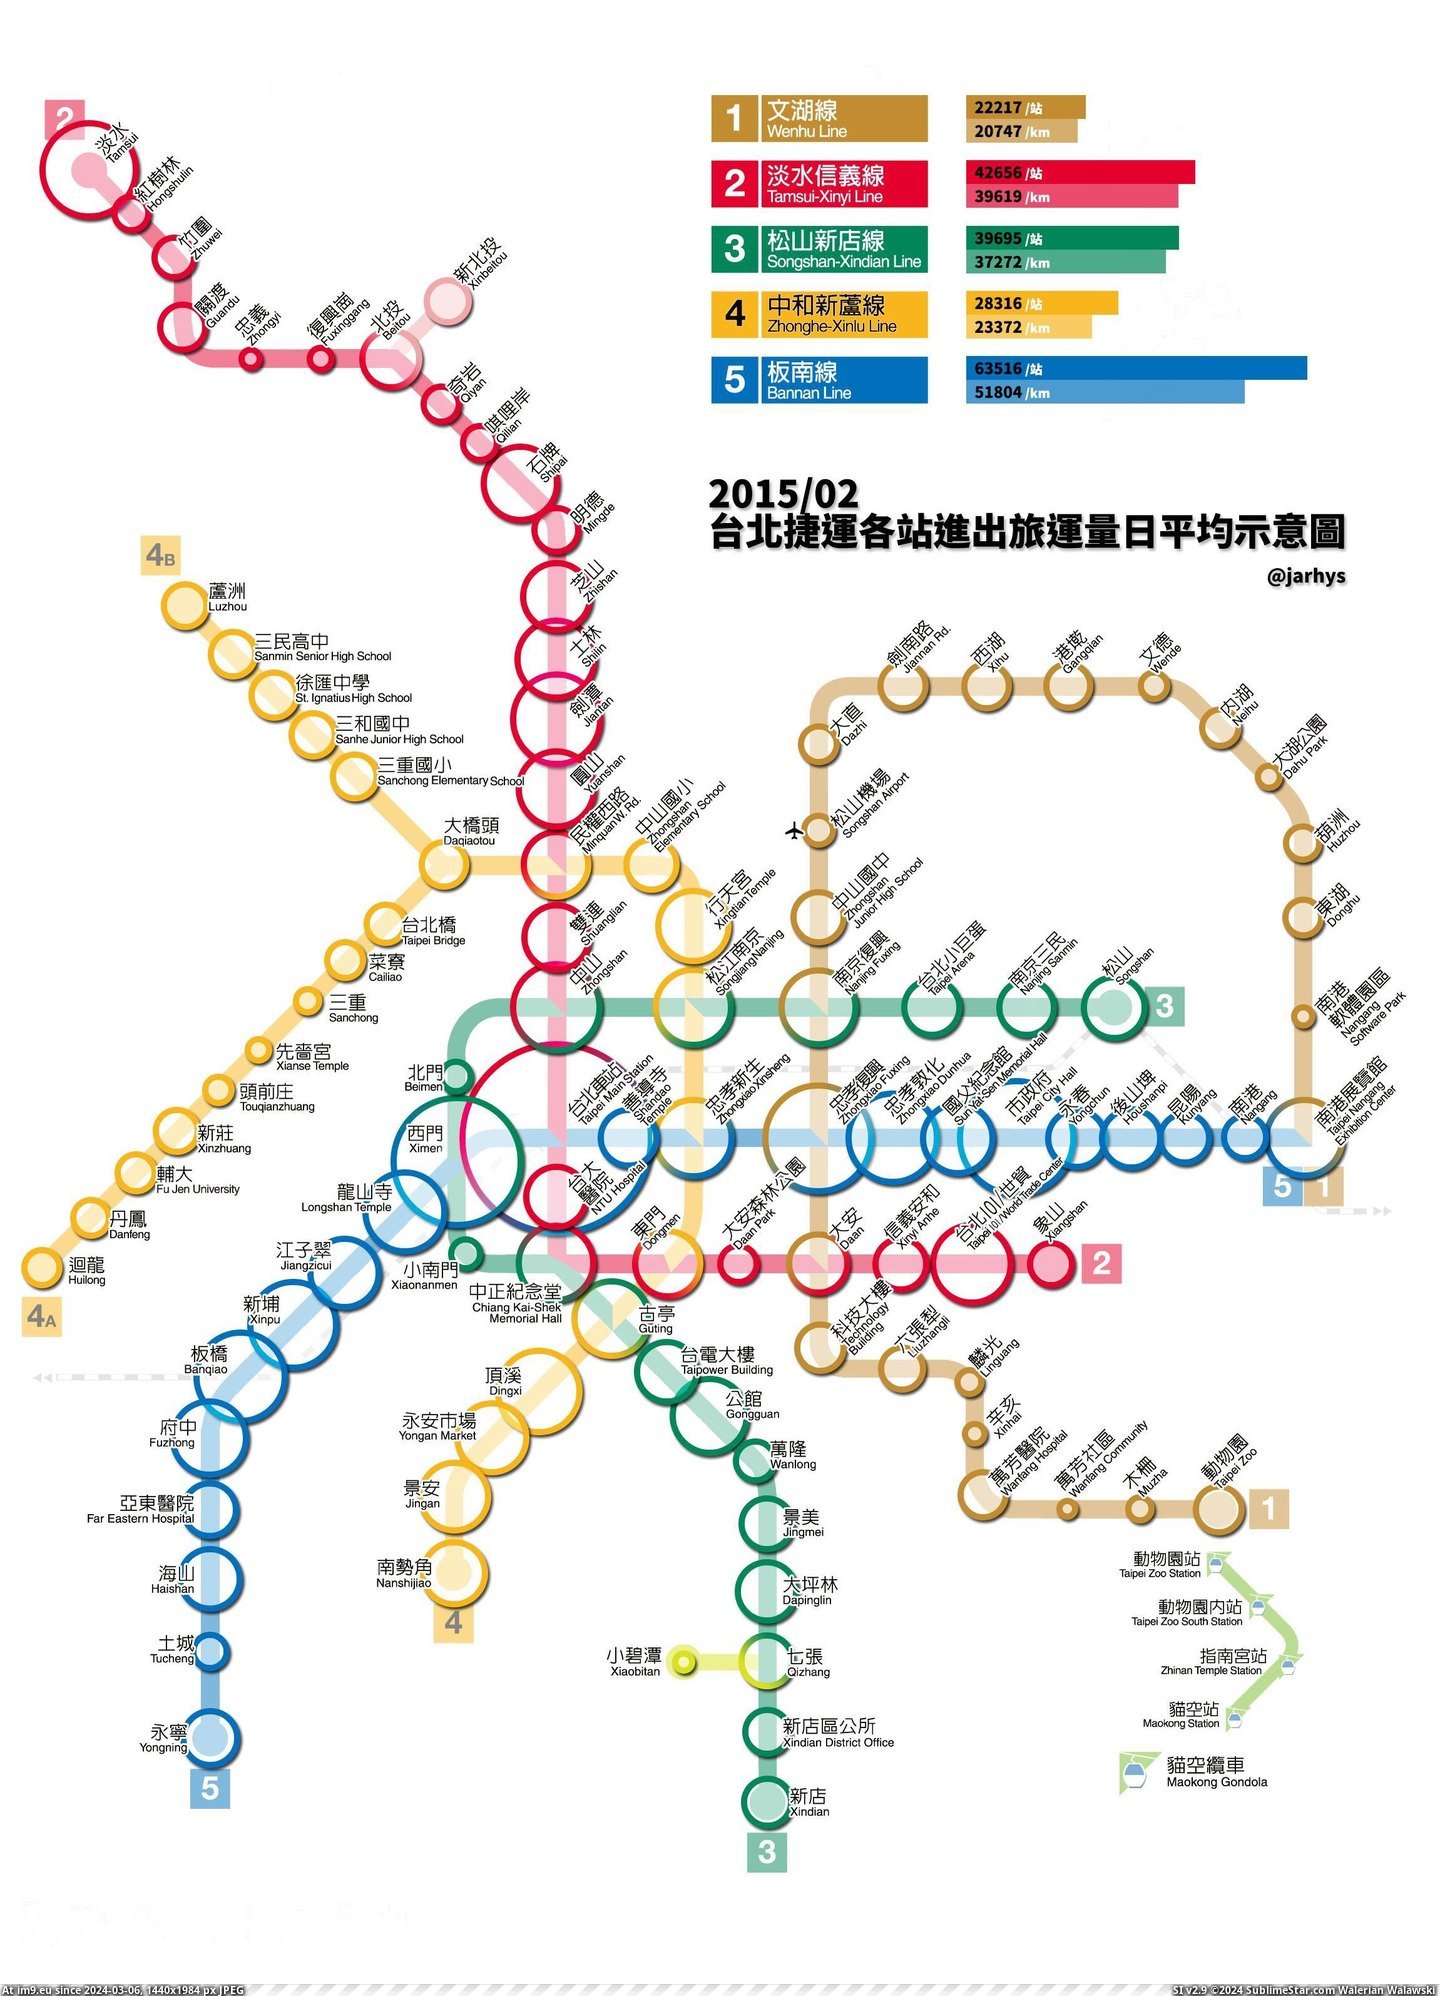 #Size #Relative #Gates #Numbers #Entering #Terms #Taipei #Passenger #Taiwan #Feb #Stations [Mapporn] Relative size of all Taipei MRT stations, in terms of passenger numbers entering and exiting gates, Feb 2015 [taiwan]  Pic. (Bild von album My r/MAPS favs))